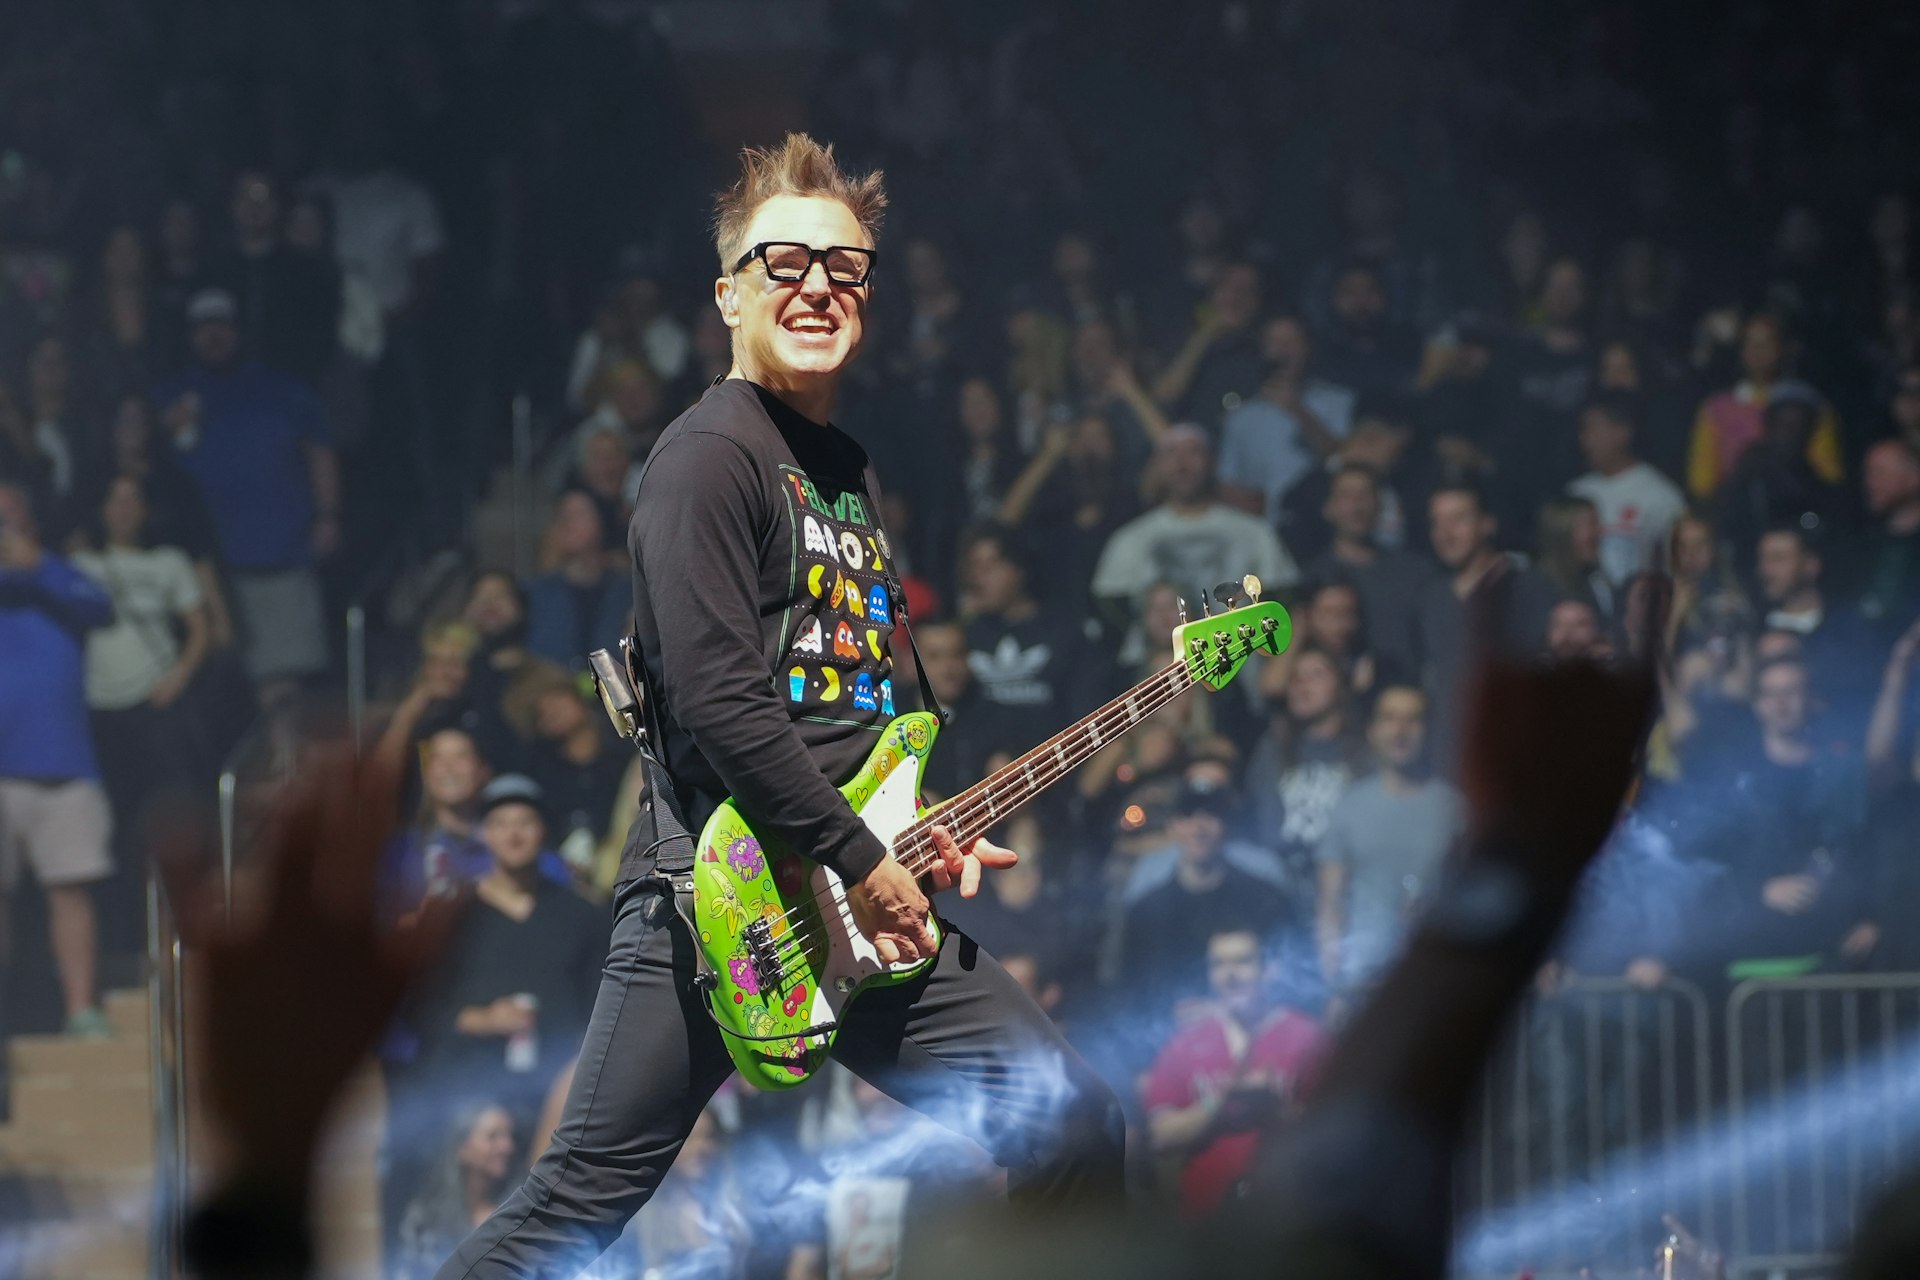 Mark Hoppus of Blink-182 performs onstage at Madison Square Garden, New York City, USA